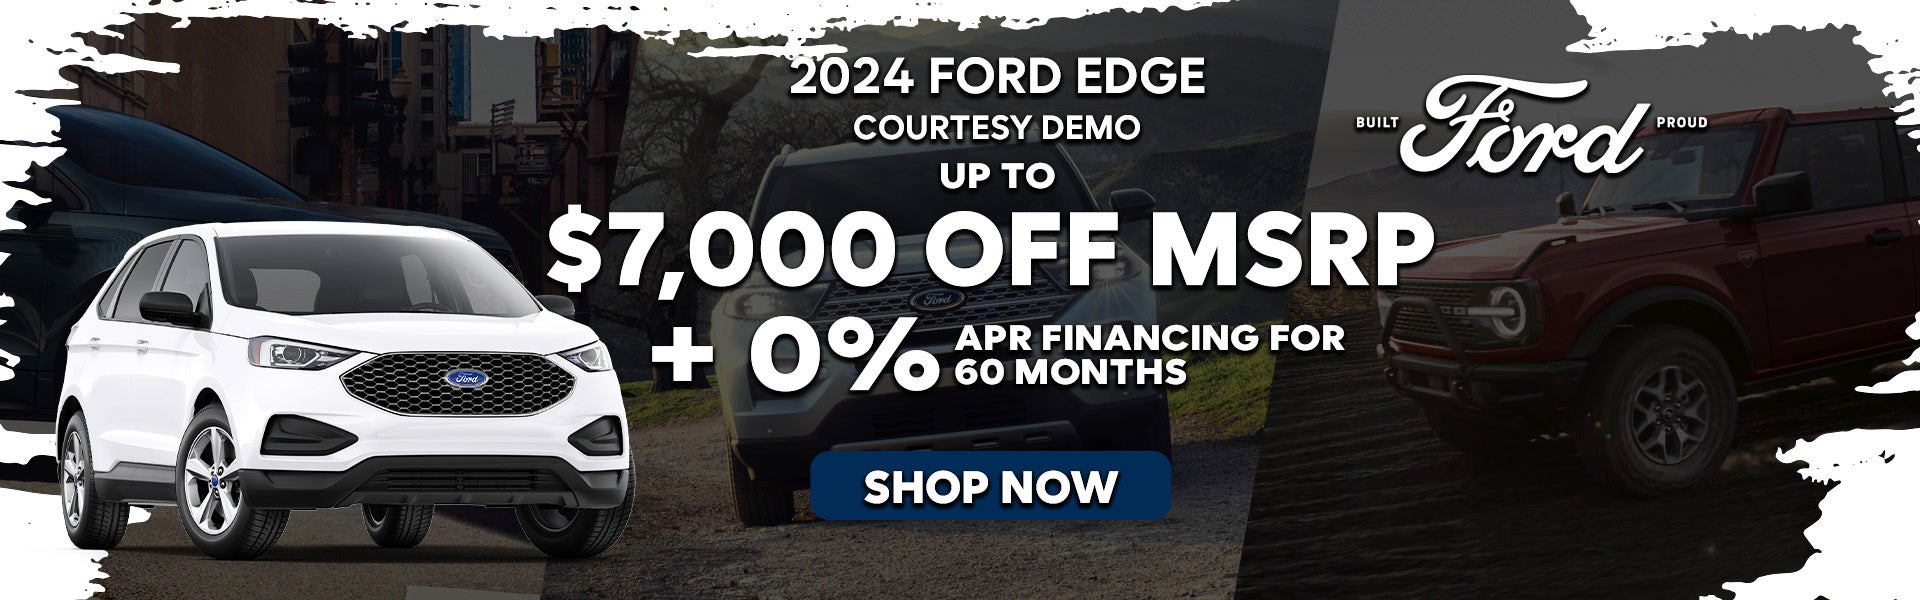 2024 Ford Edge Courtesy Vehicle Special Offer